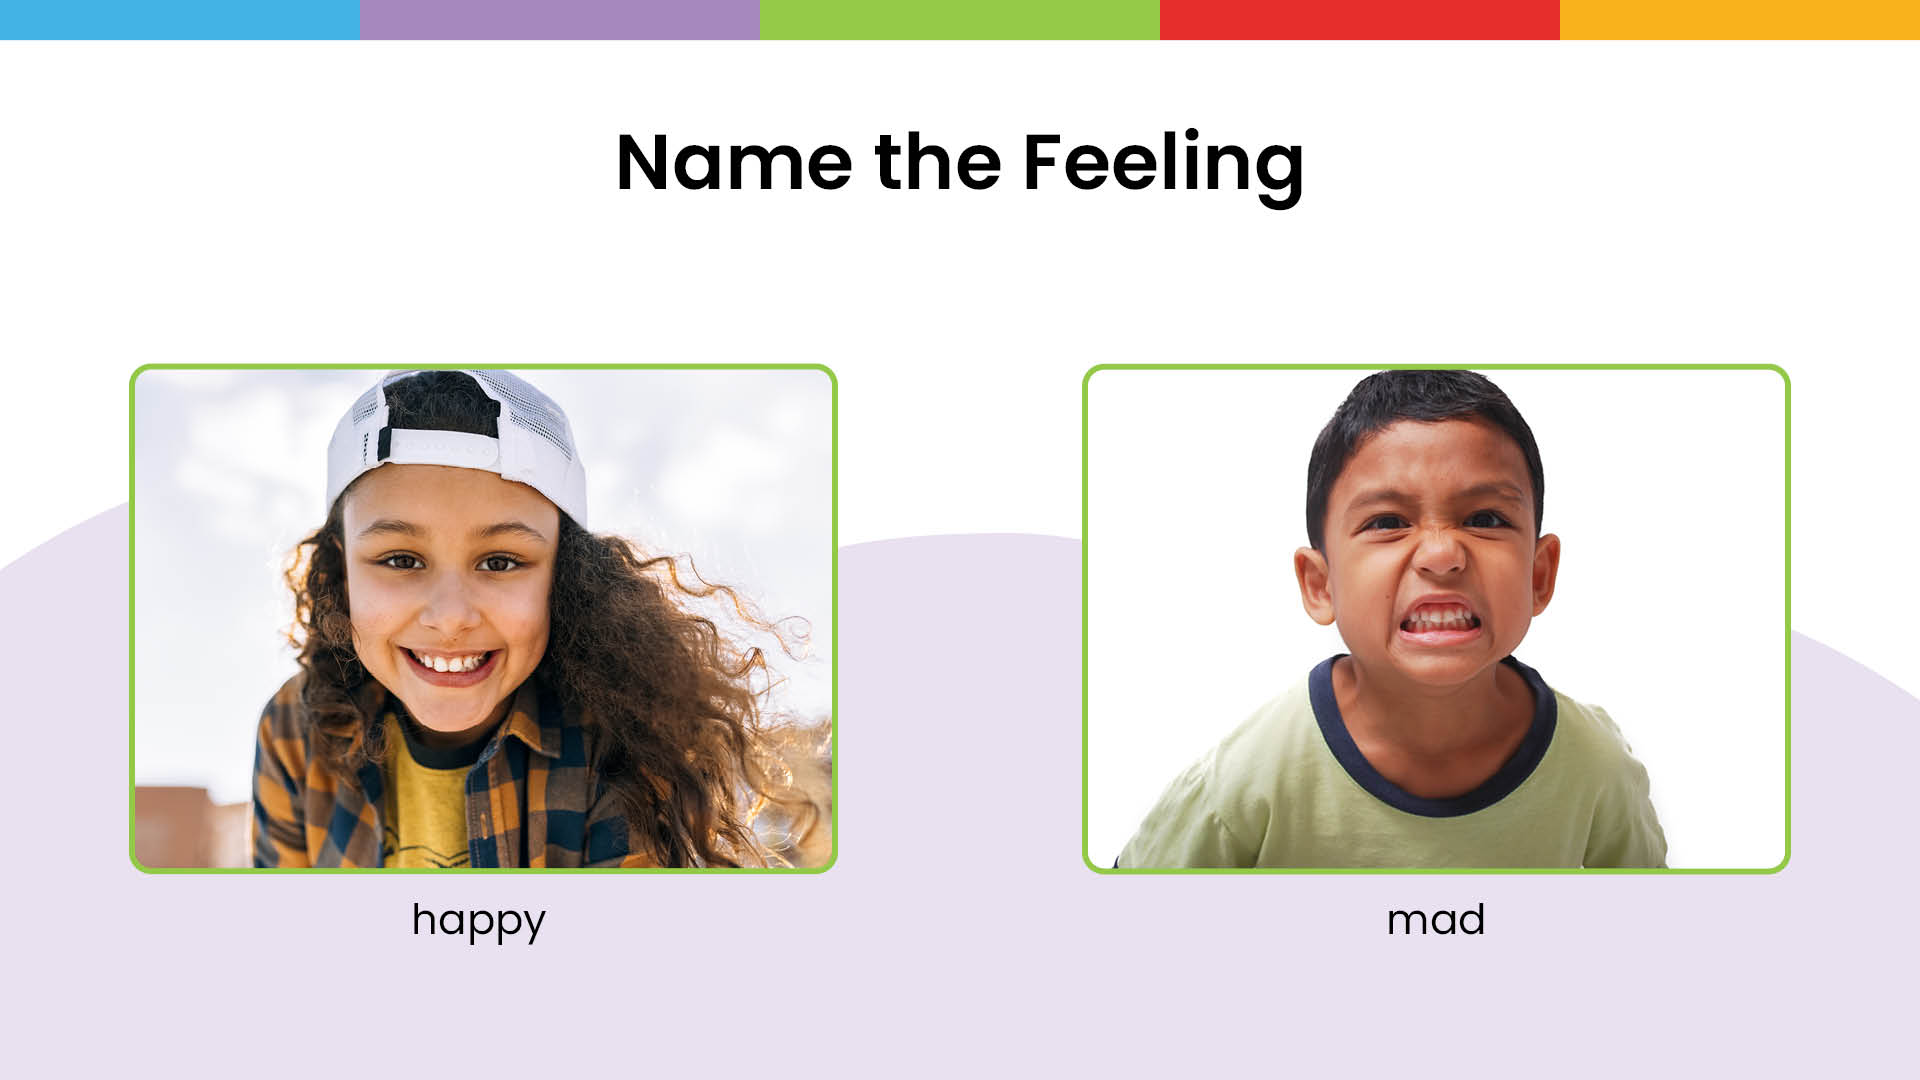 Helping Kids Understand the Connection Between Feelings and Mood